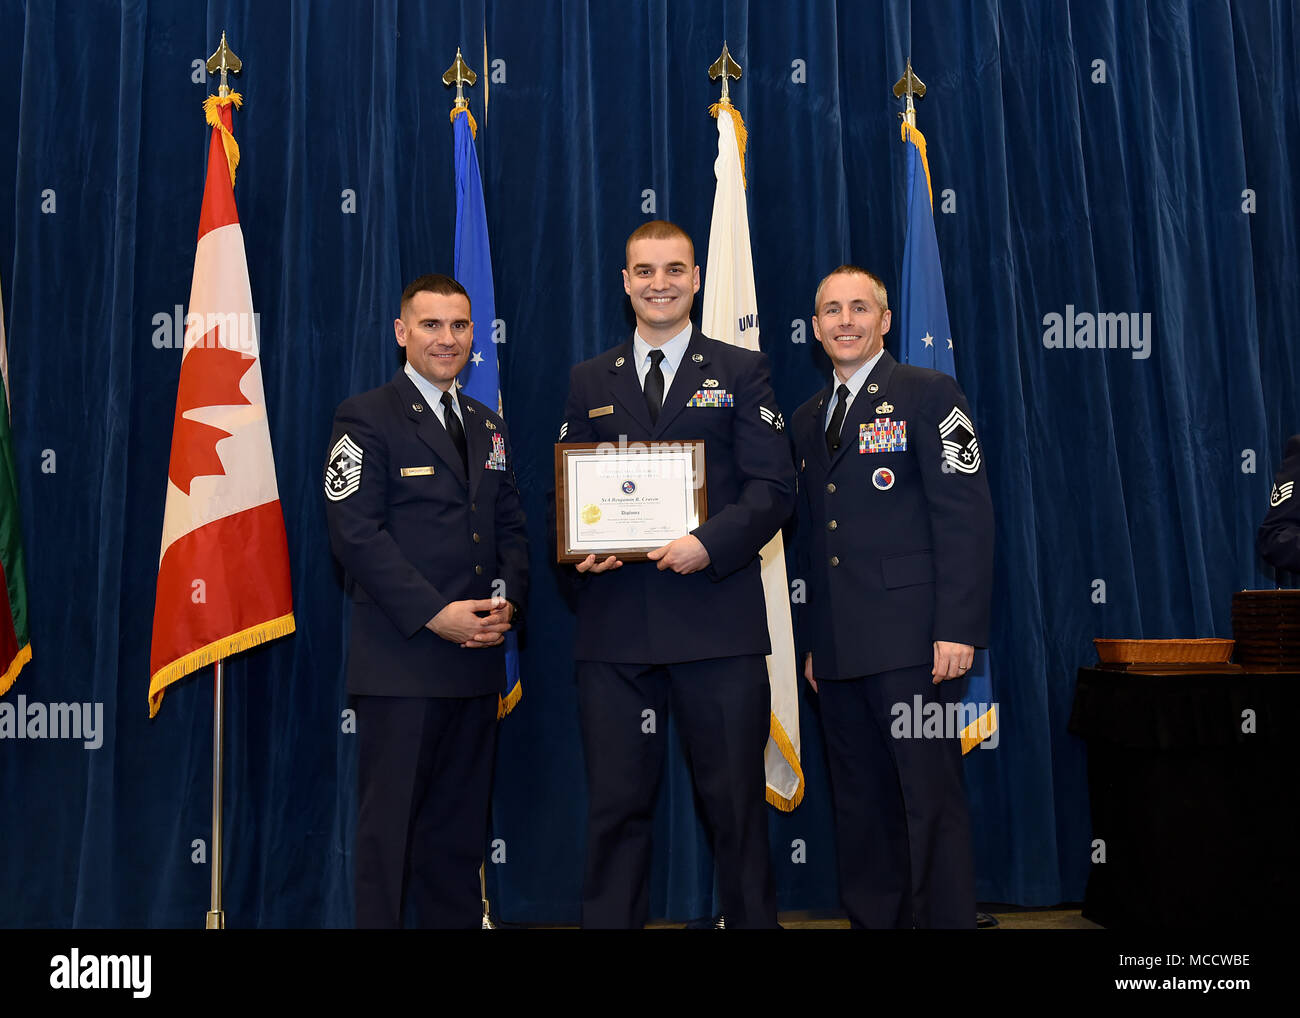 Senior Airman Benjamin Craven from Traux Field Air National Guard Base, Wis., takes the Distinguished Graduate Award in Airman Leadership School 18-4 at the Chief Master Sgt. Paul H. Lankford Enlisted Professional Military Education Center on McGhee Tyson Air National Guard Base in East Tennessee, Feb. 8, 2018, during the graduation ceremony. (U.S. Air National Guard photo/Master Sgt. Mike R. Smith) Stock Photo